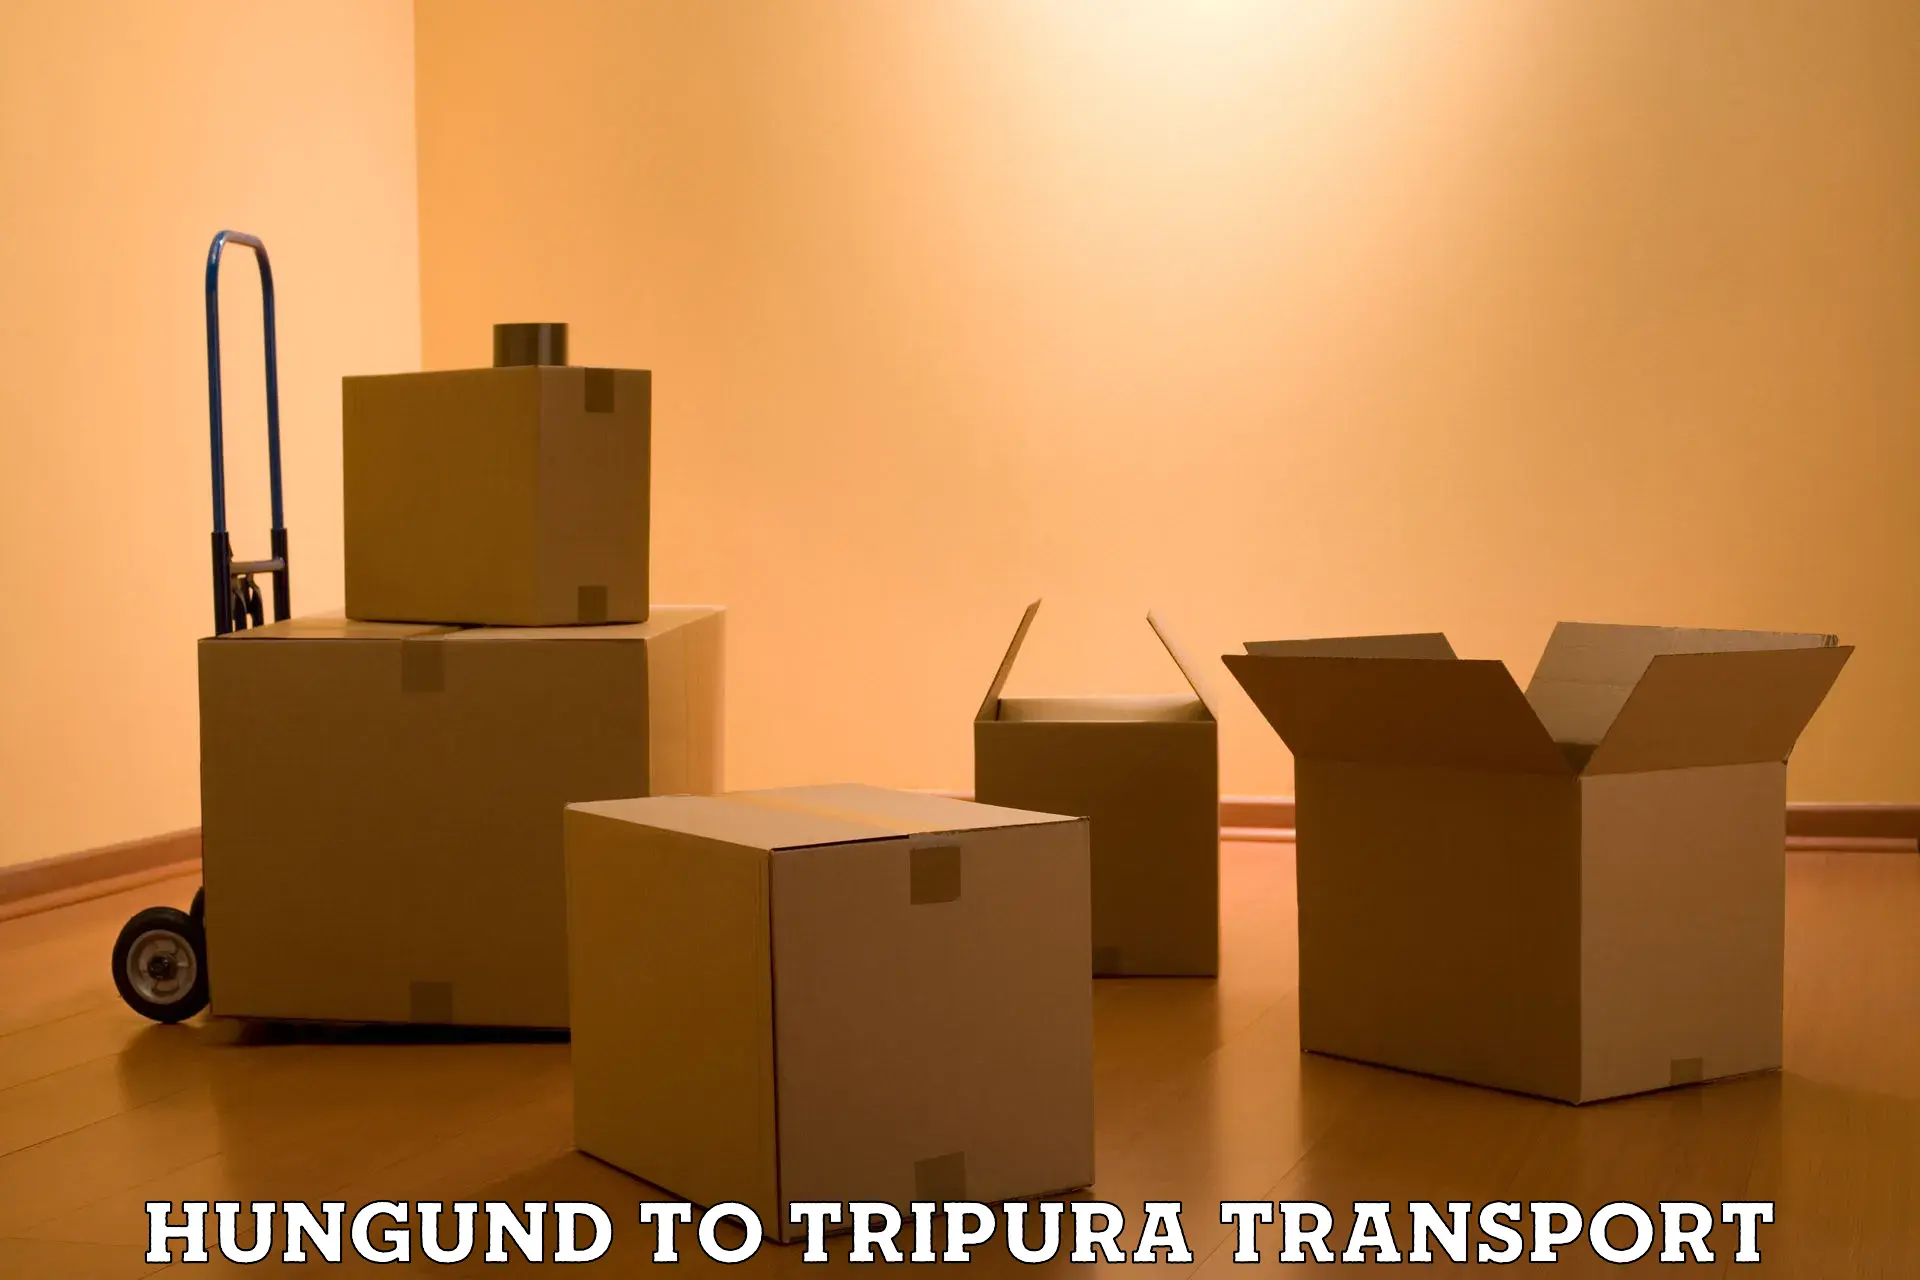 Air freight transport services in Hungund to Tripura